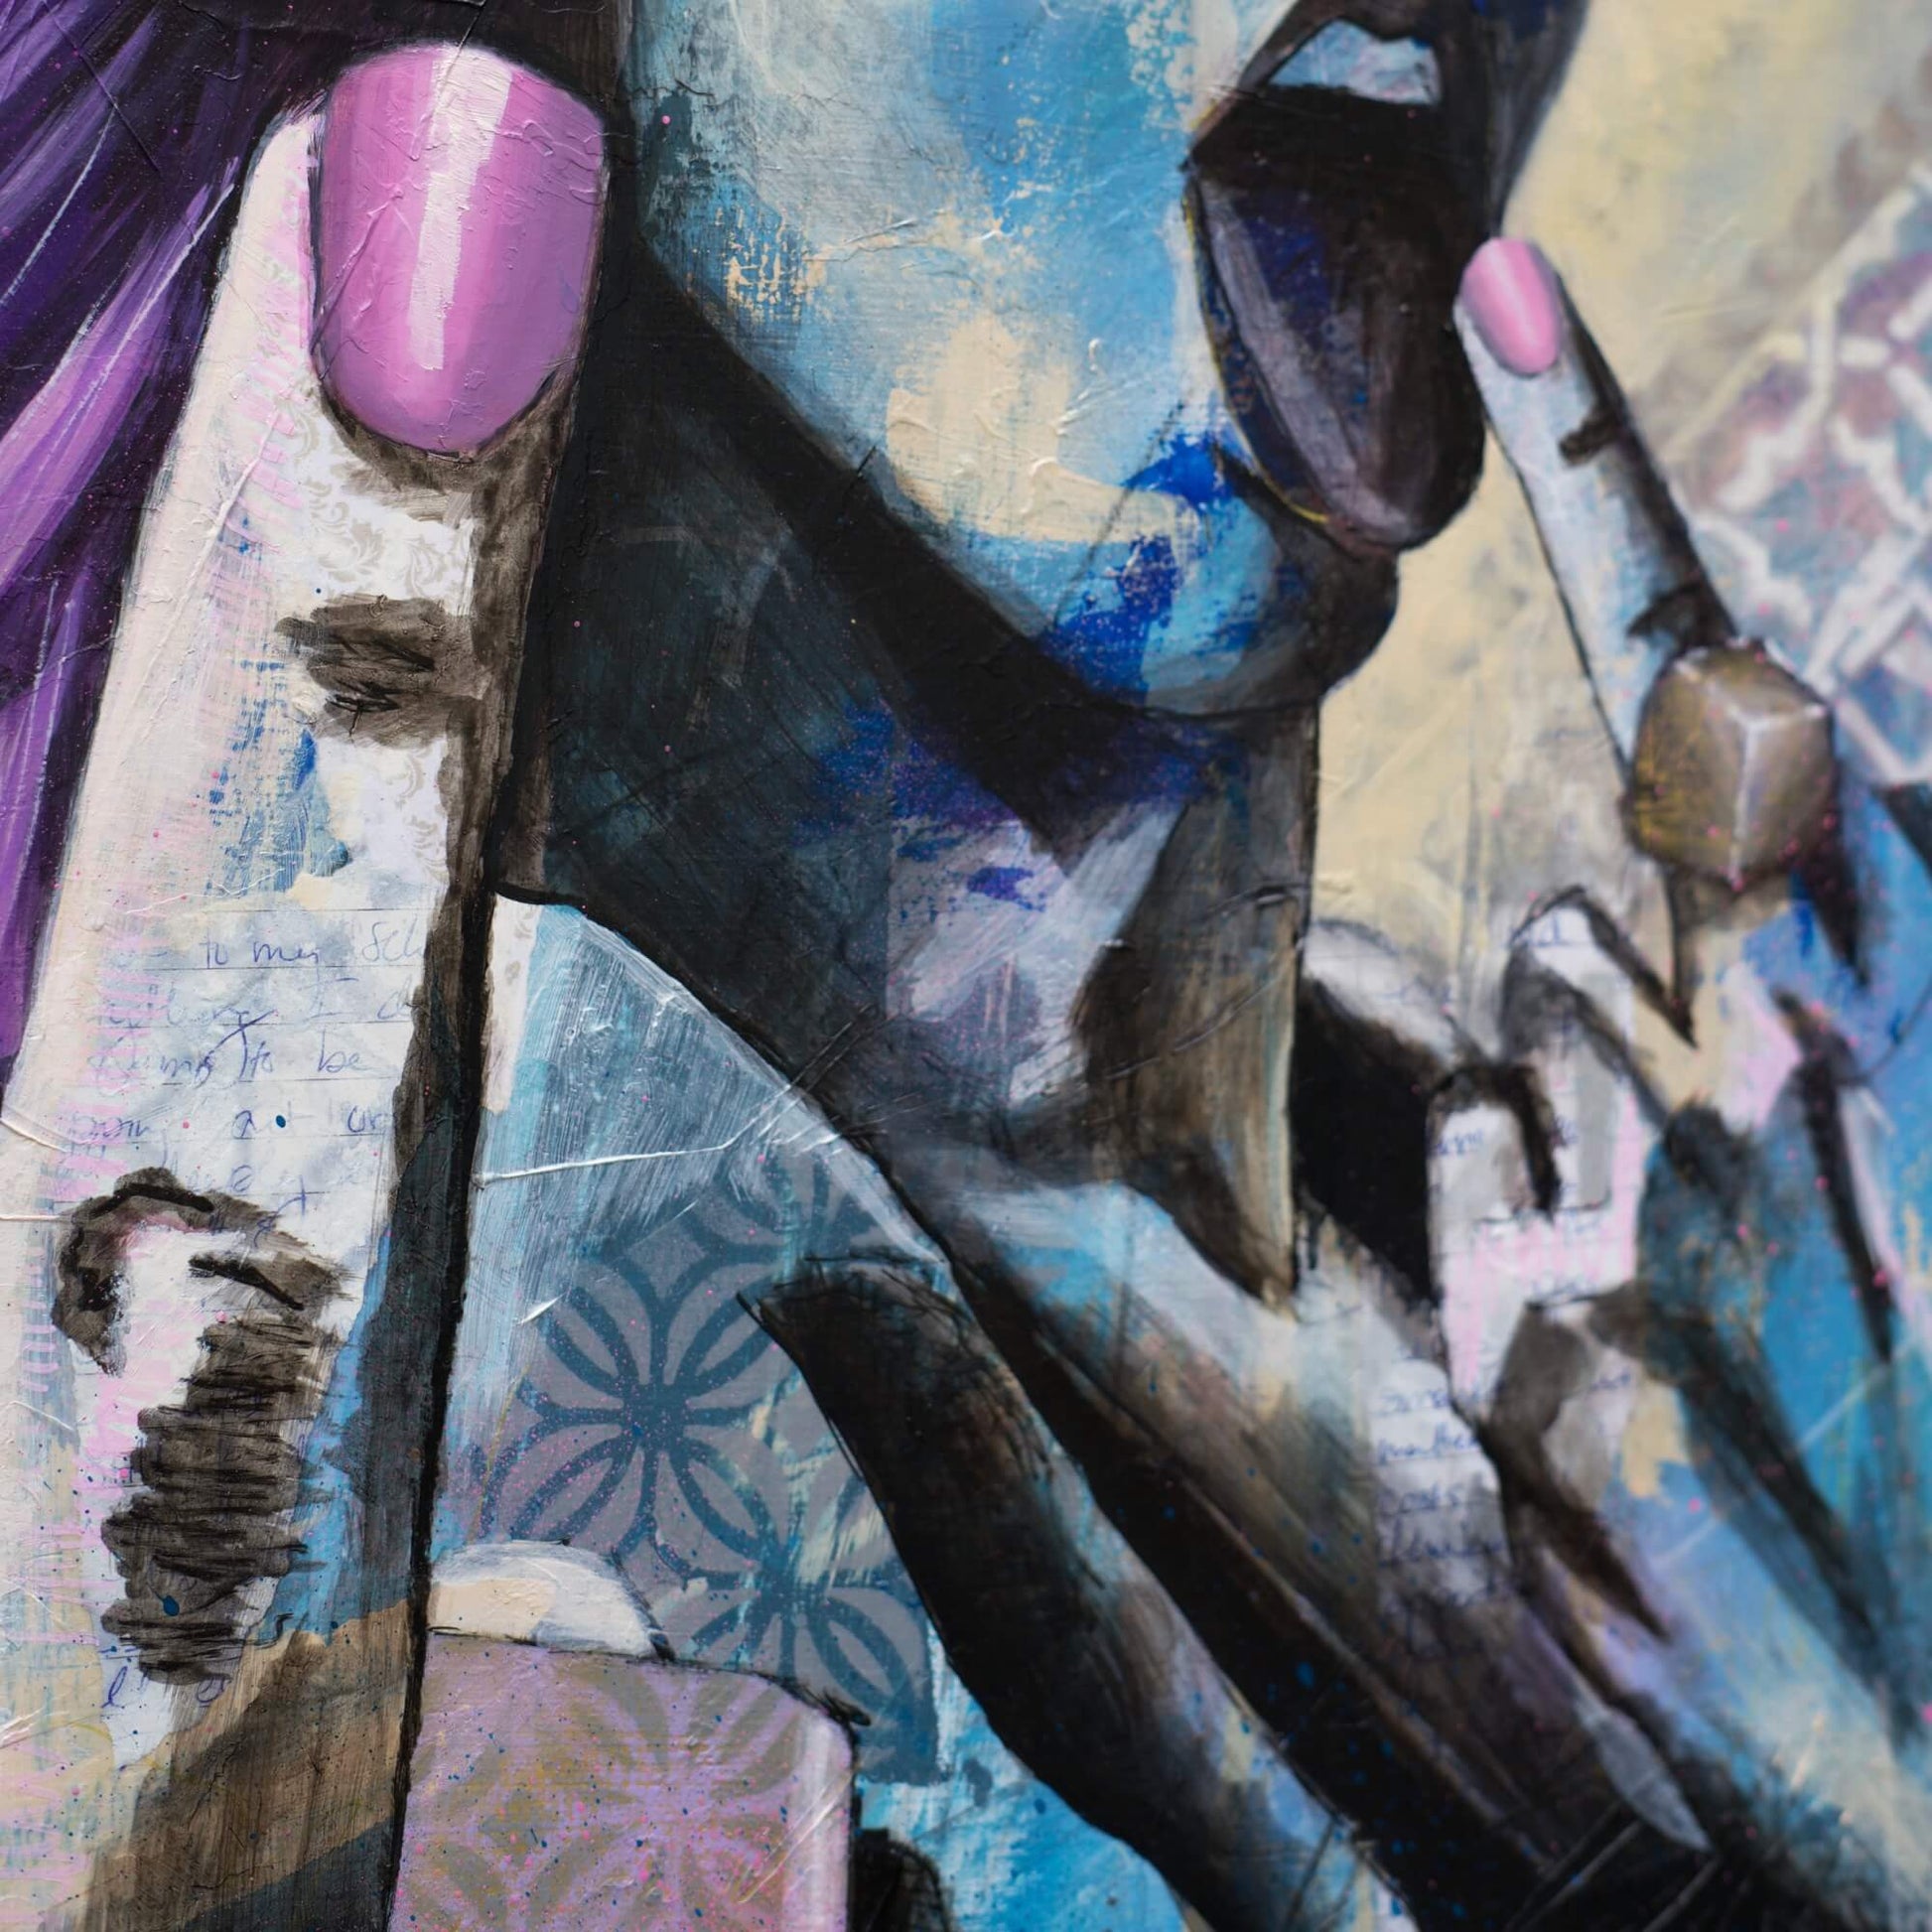 Artworks for Sale –Street Art Paintings of Women – Blue, Gold & Purple Art – 'Come Hither' – Art Wall Painting by Criss Chaney